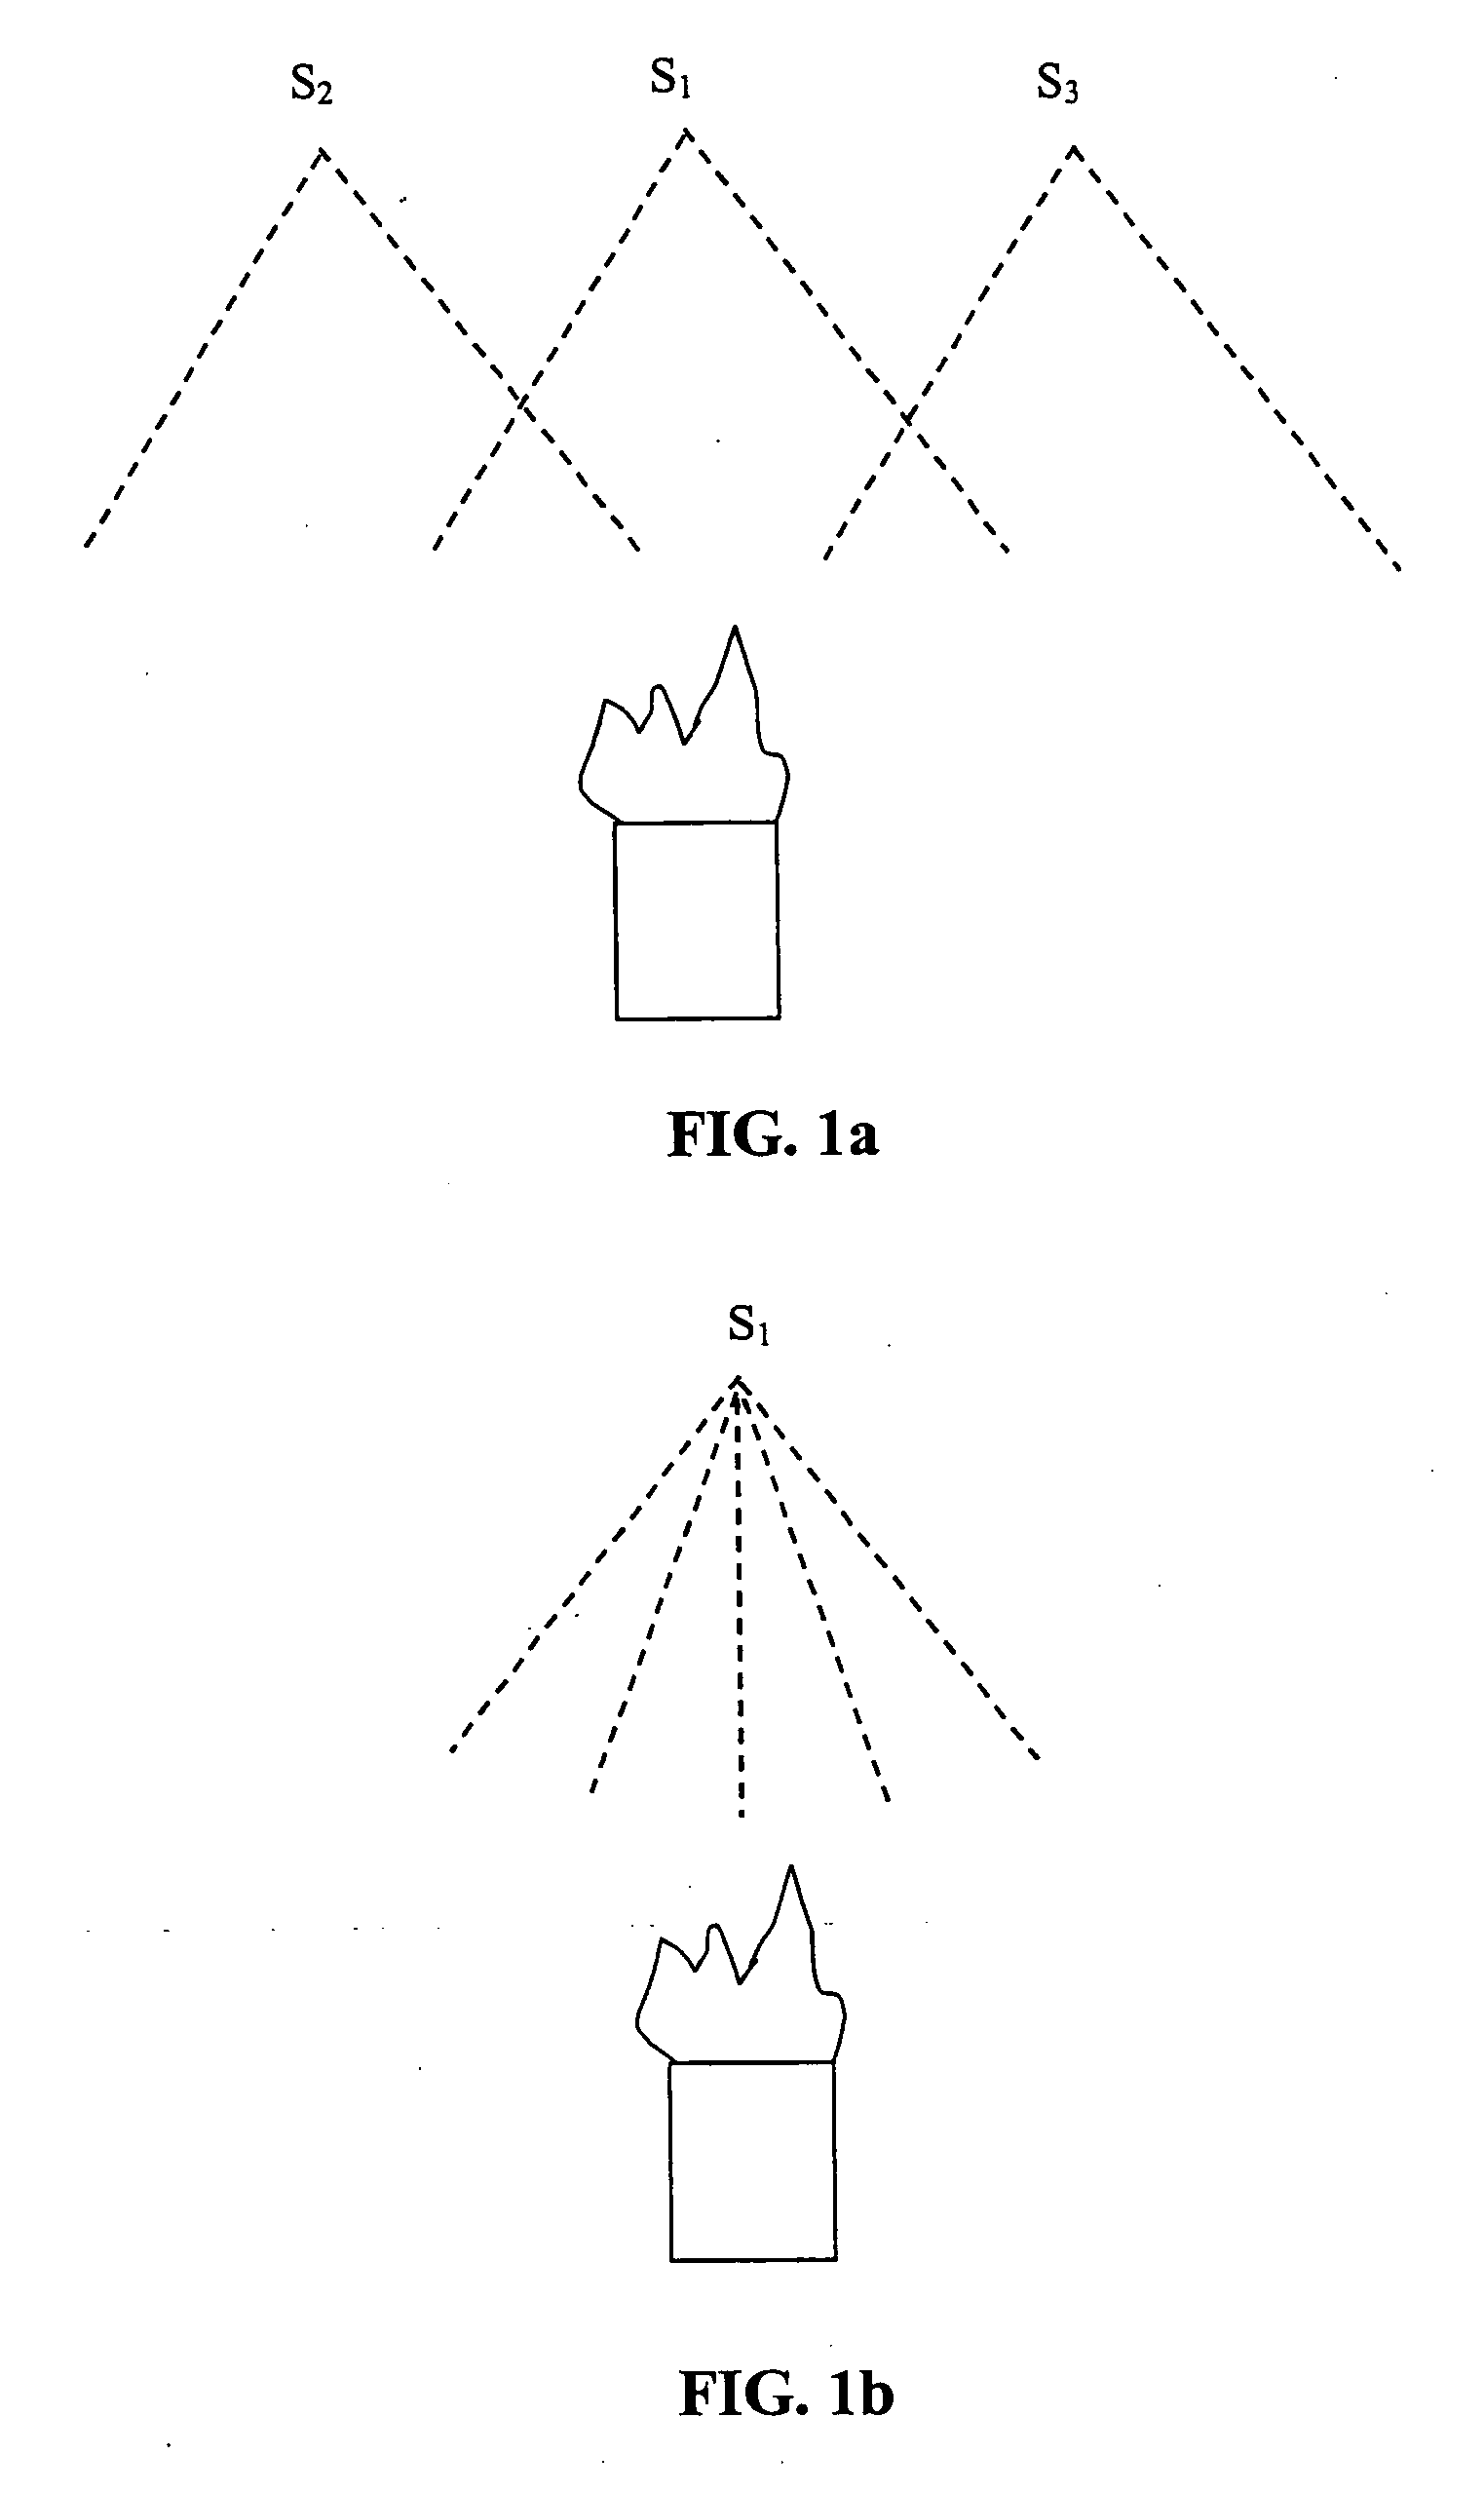 Spray head and nozzle arrangement for fire suppression